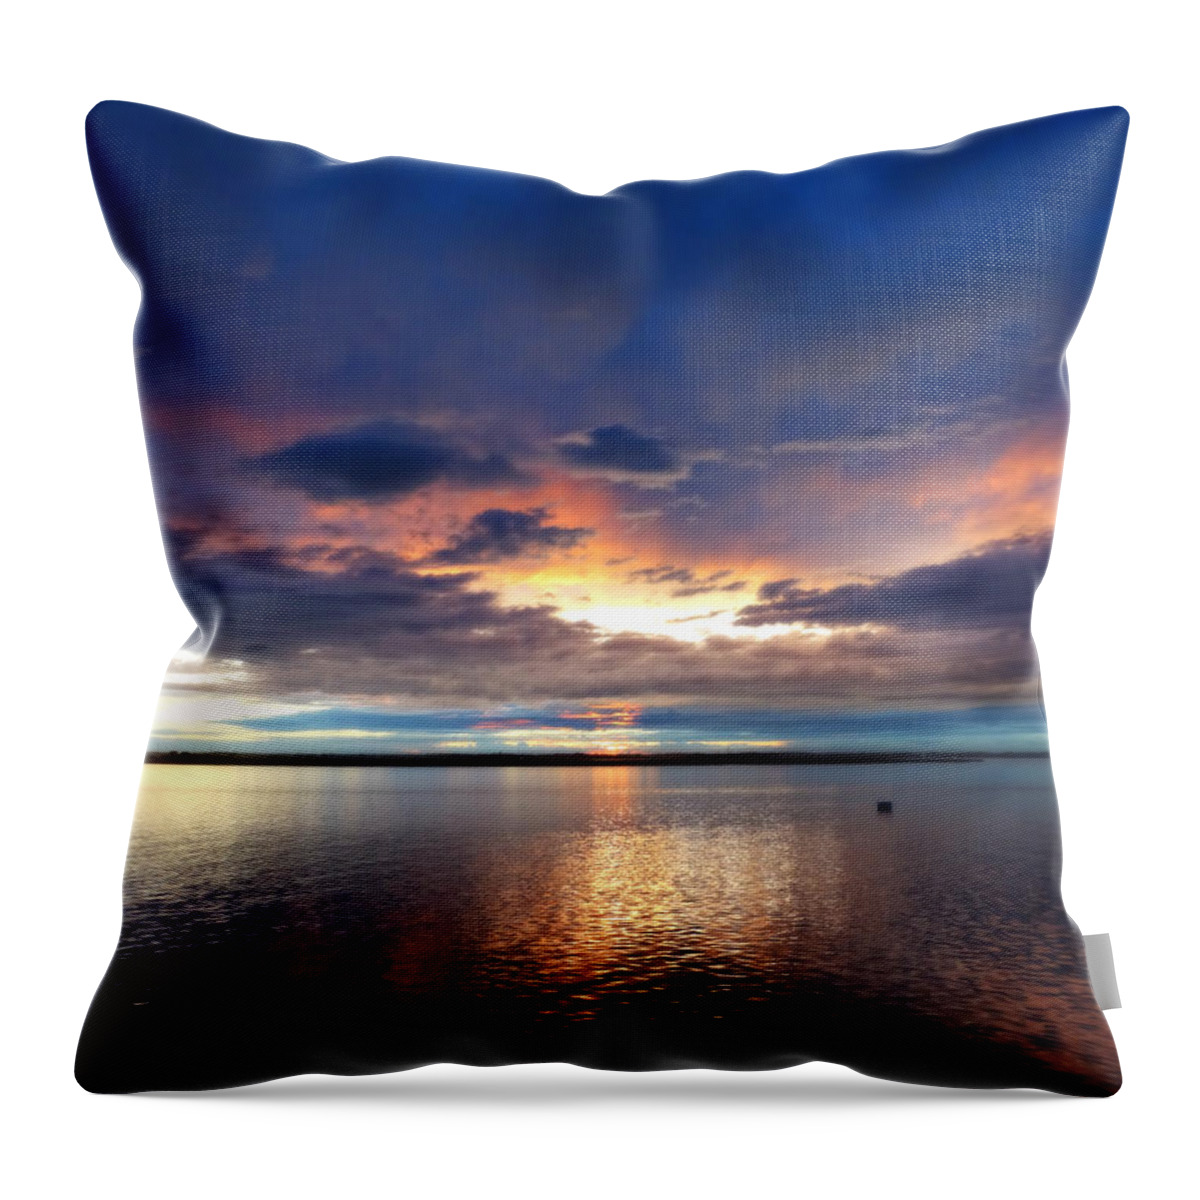 Afterglow Throw Pillow featuring the photograph Afterglow by Dark Whimsy